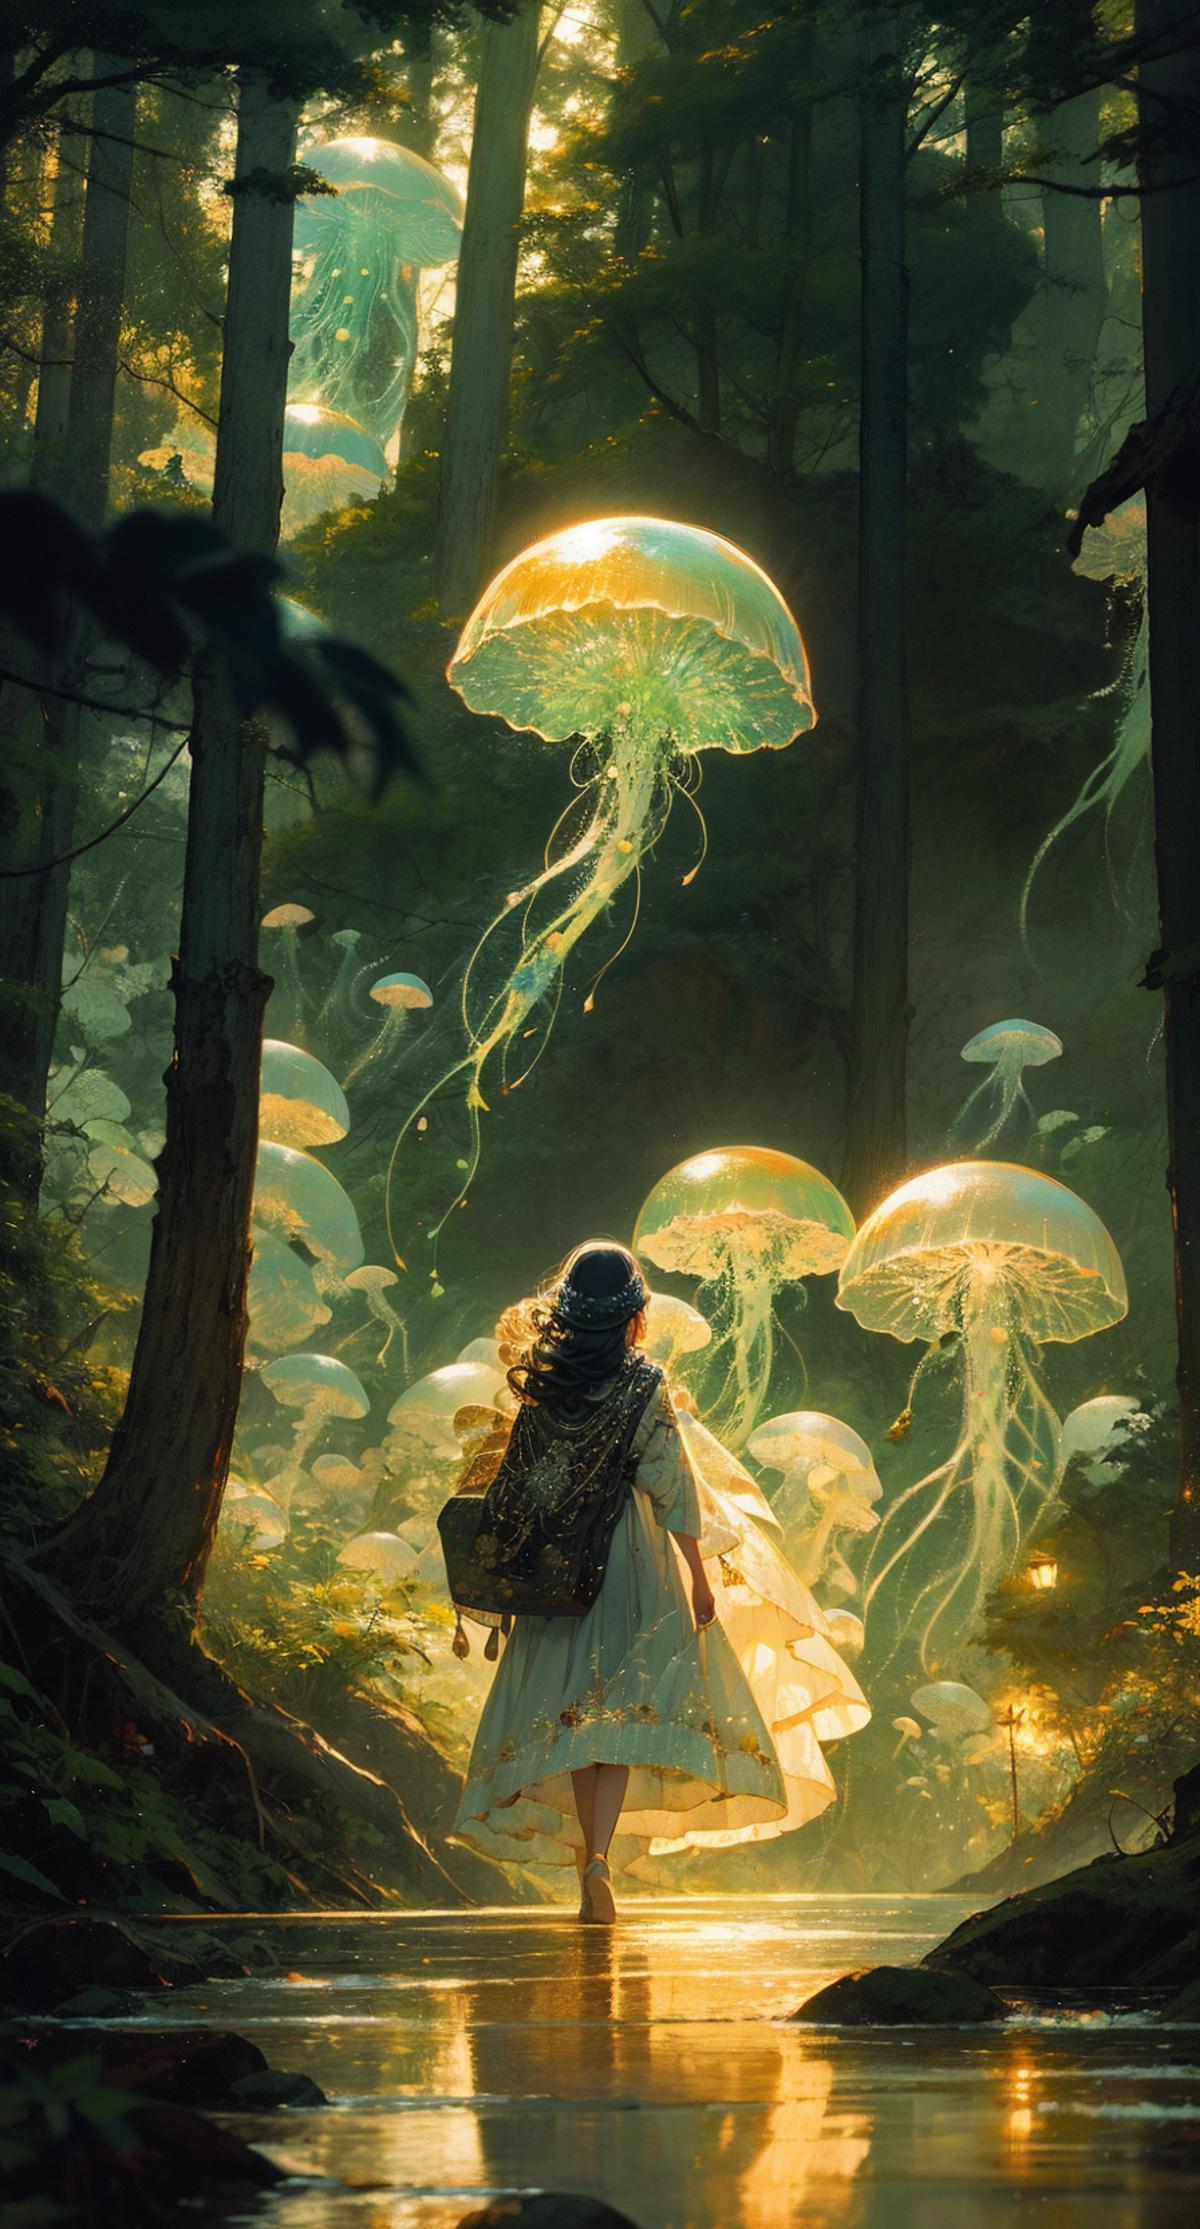 A woman walking through a forest of floating jellyfish.